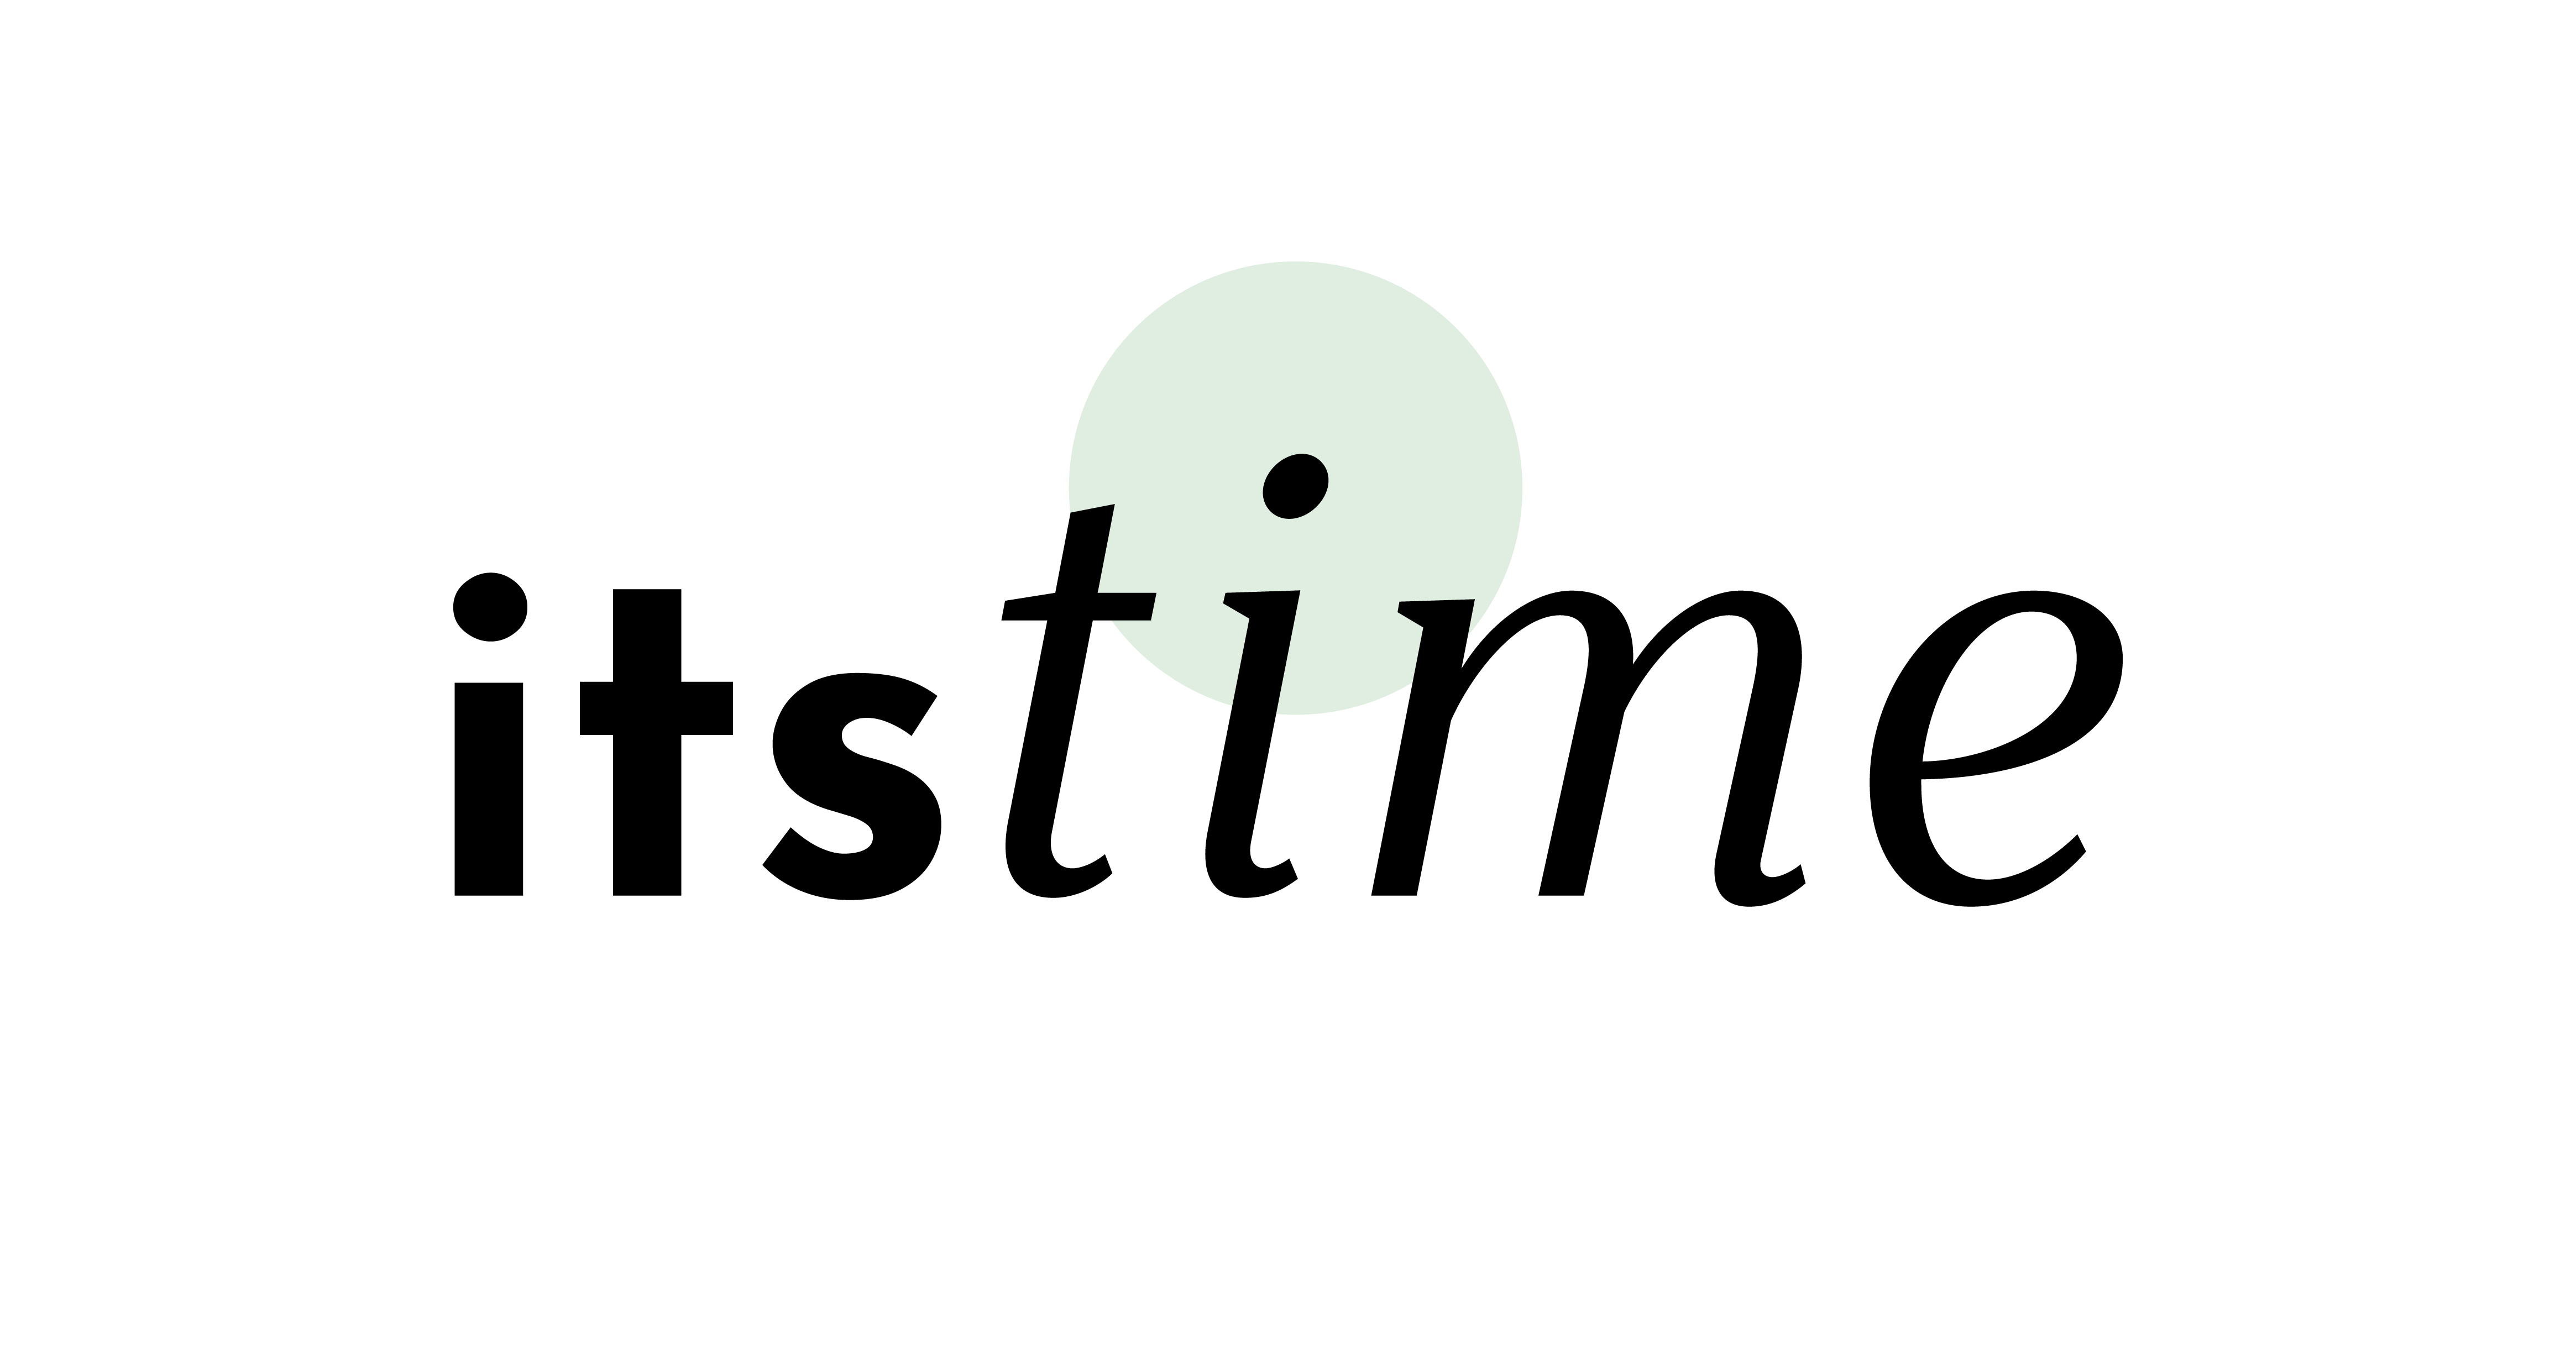 itstime - For better organizations